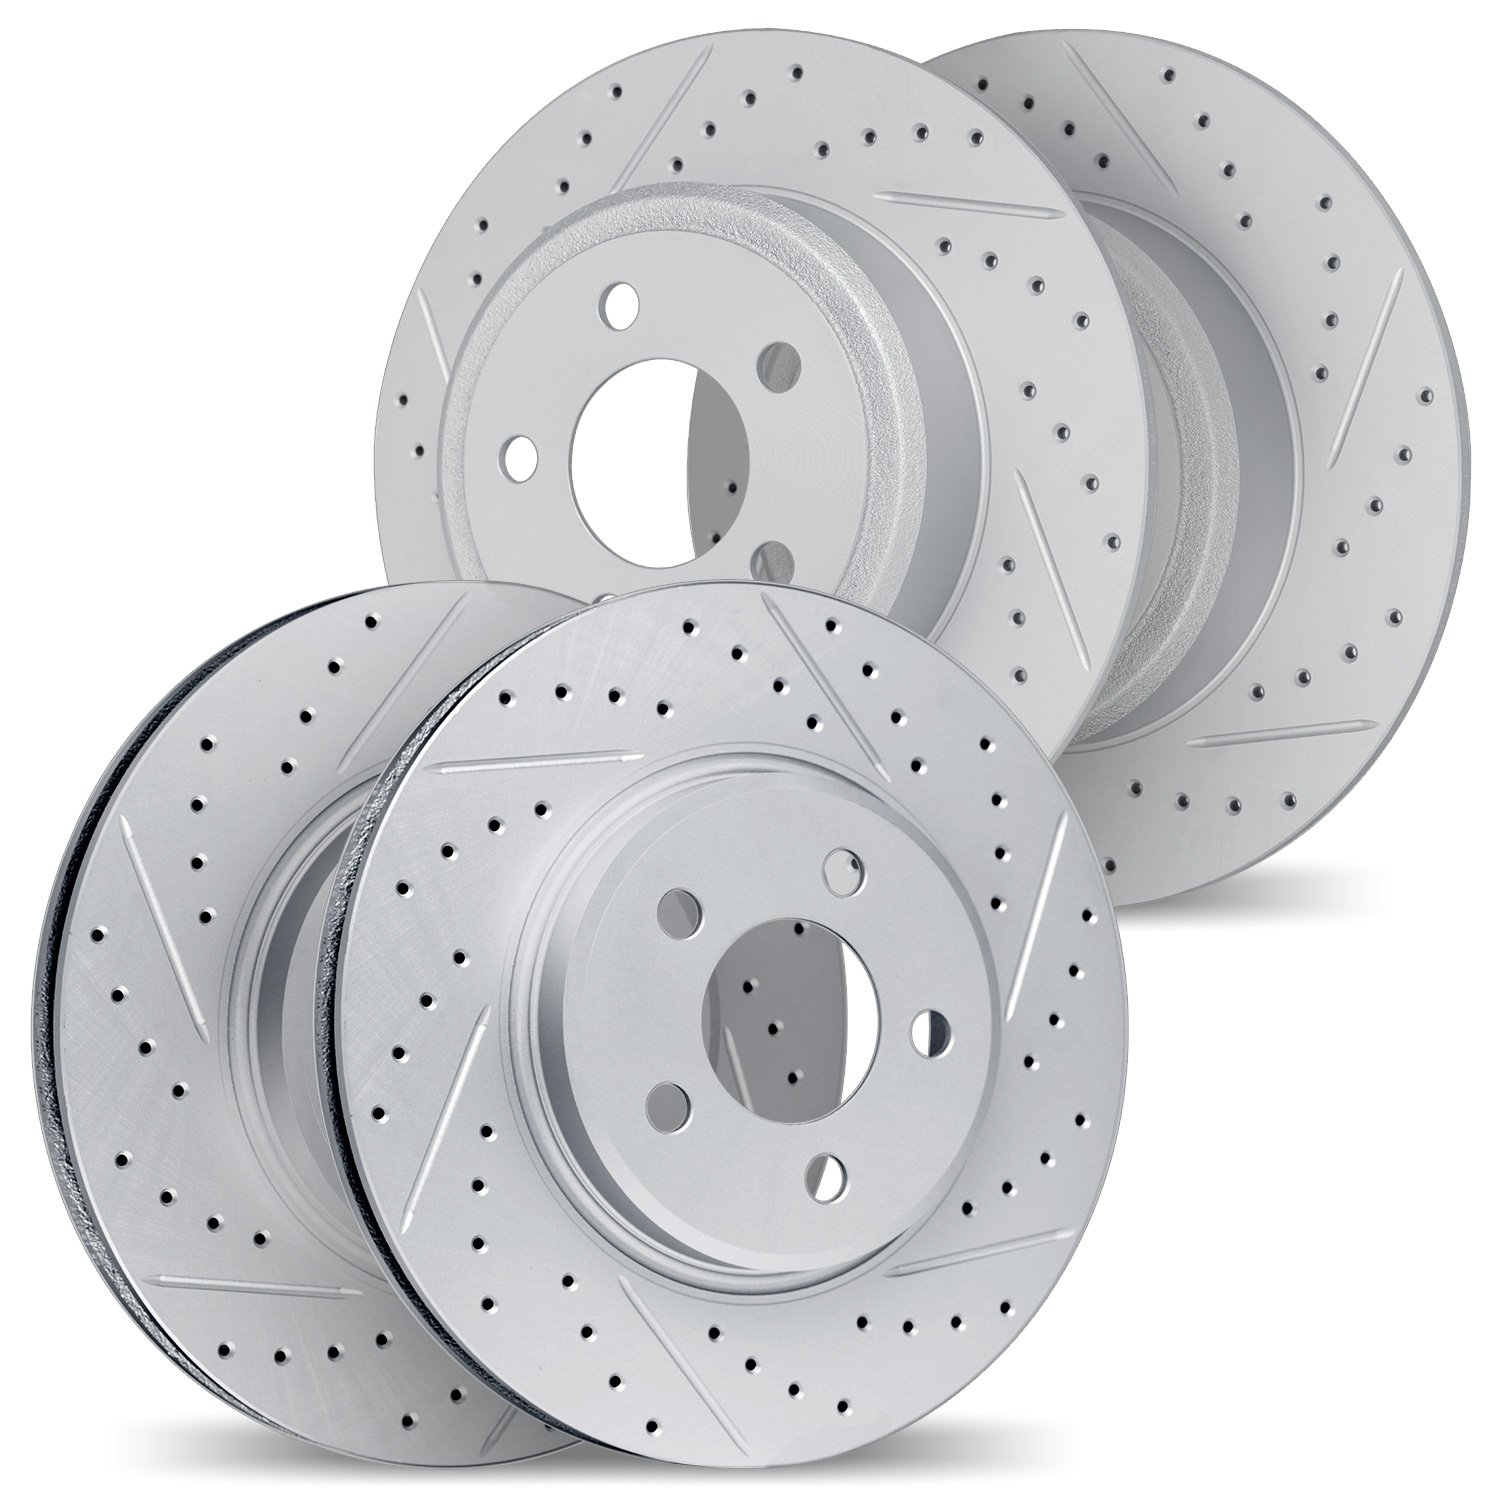 2004-13030 Geoperformance Drilled/Slotted Brake Rotors, 2000-2004 Subaru, Position: Front and Rear